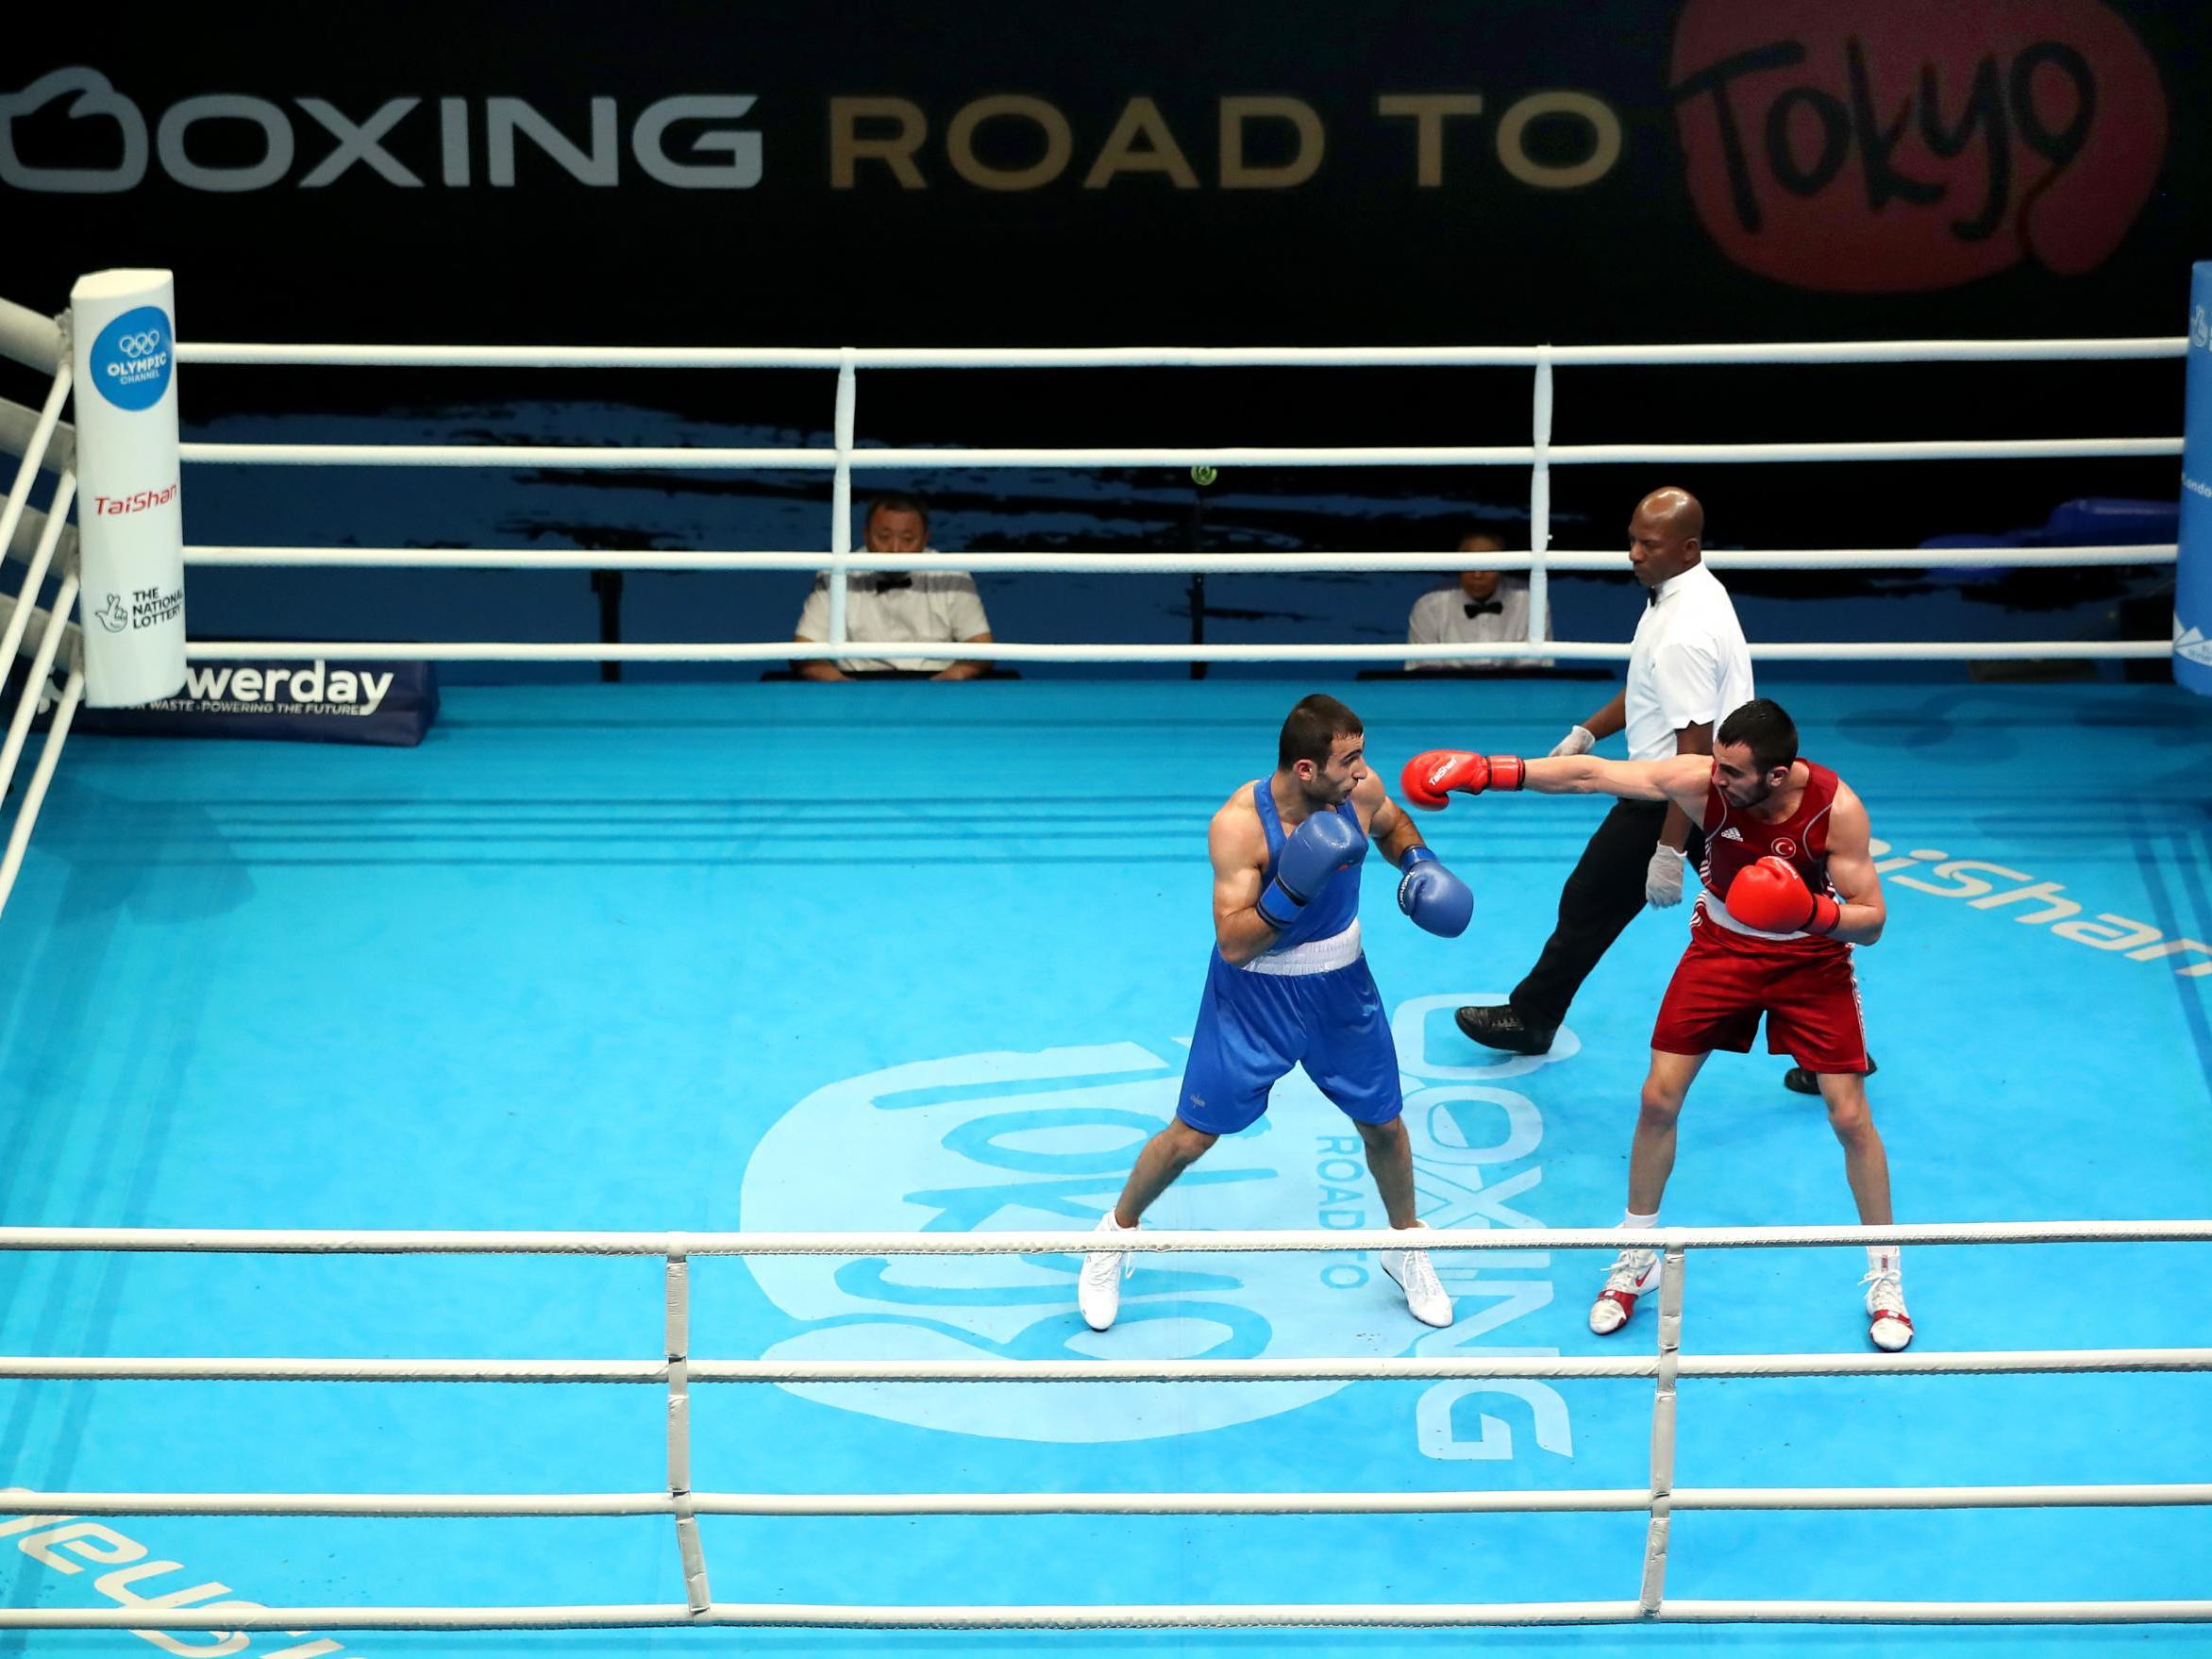 The European Olympic boxing trials in London were called off due to the coronavirus pandemic